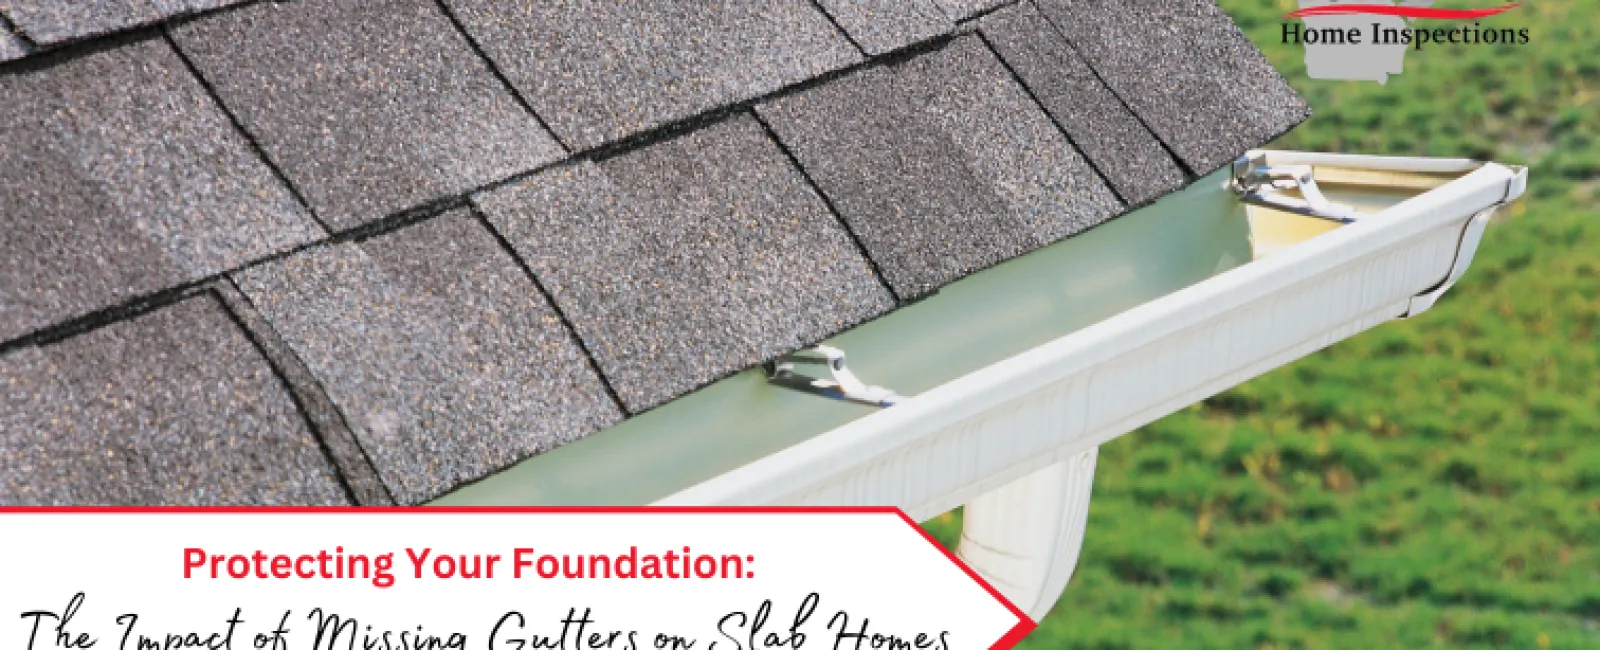 Protecting Your Foundation: The Impact of Missing Gutters on Slab Homes